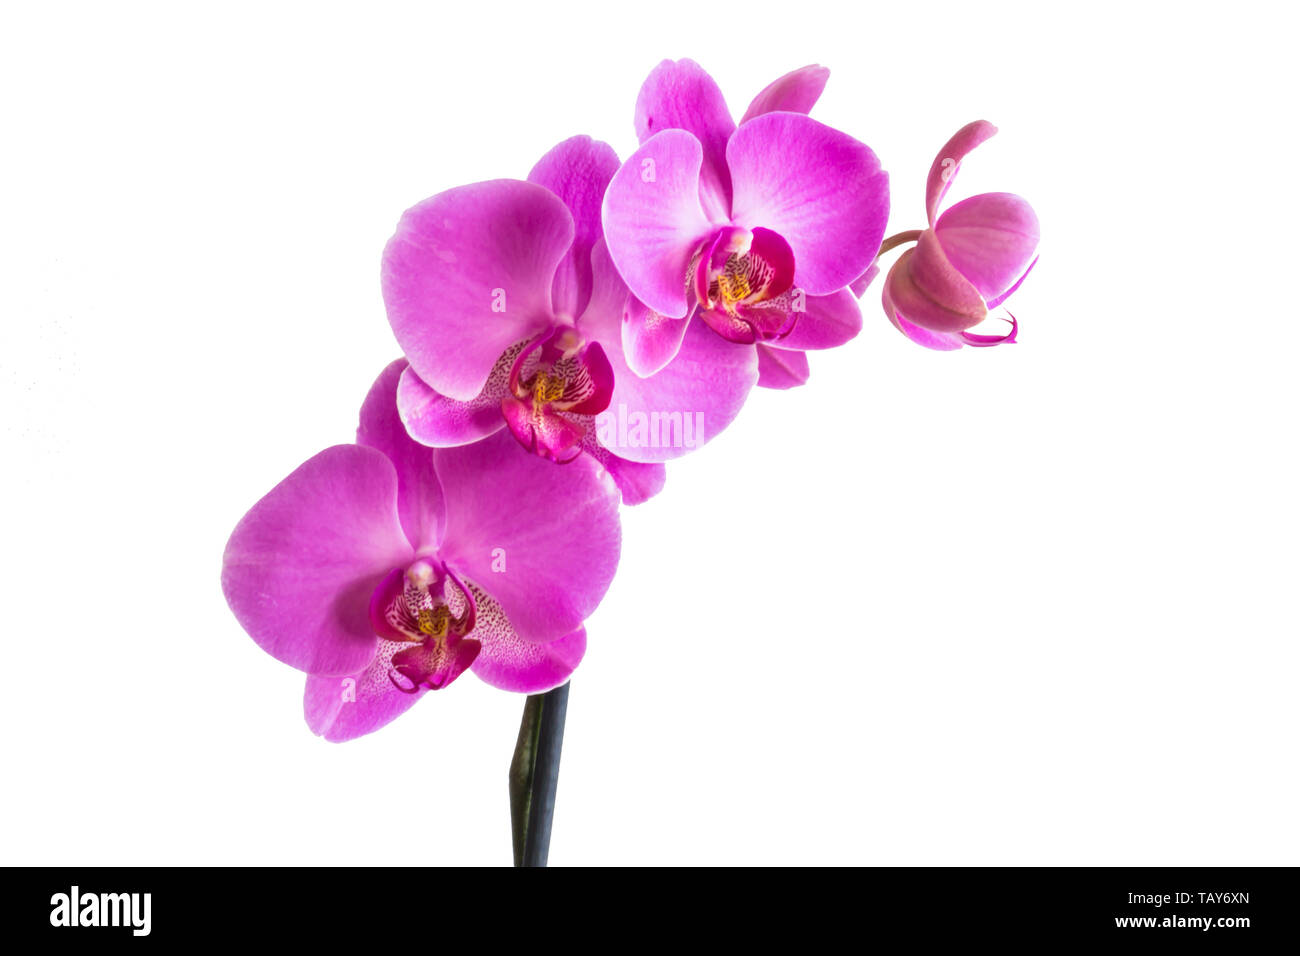 Beautiful orchid purple flowers isolated on white background. Stock Photo